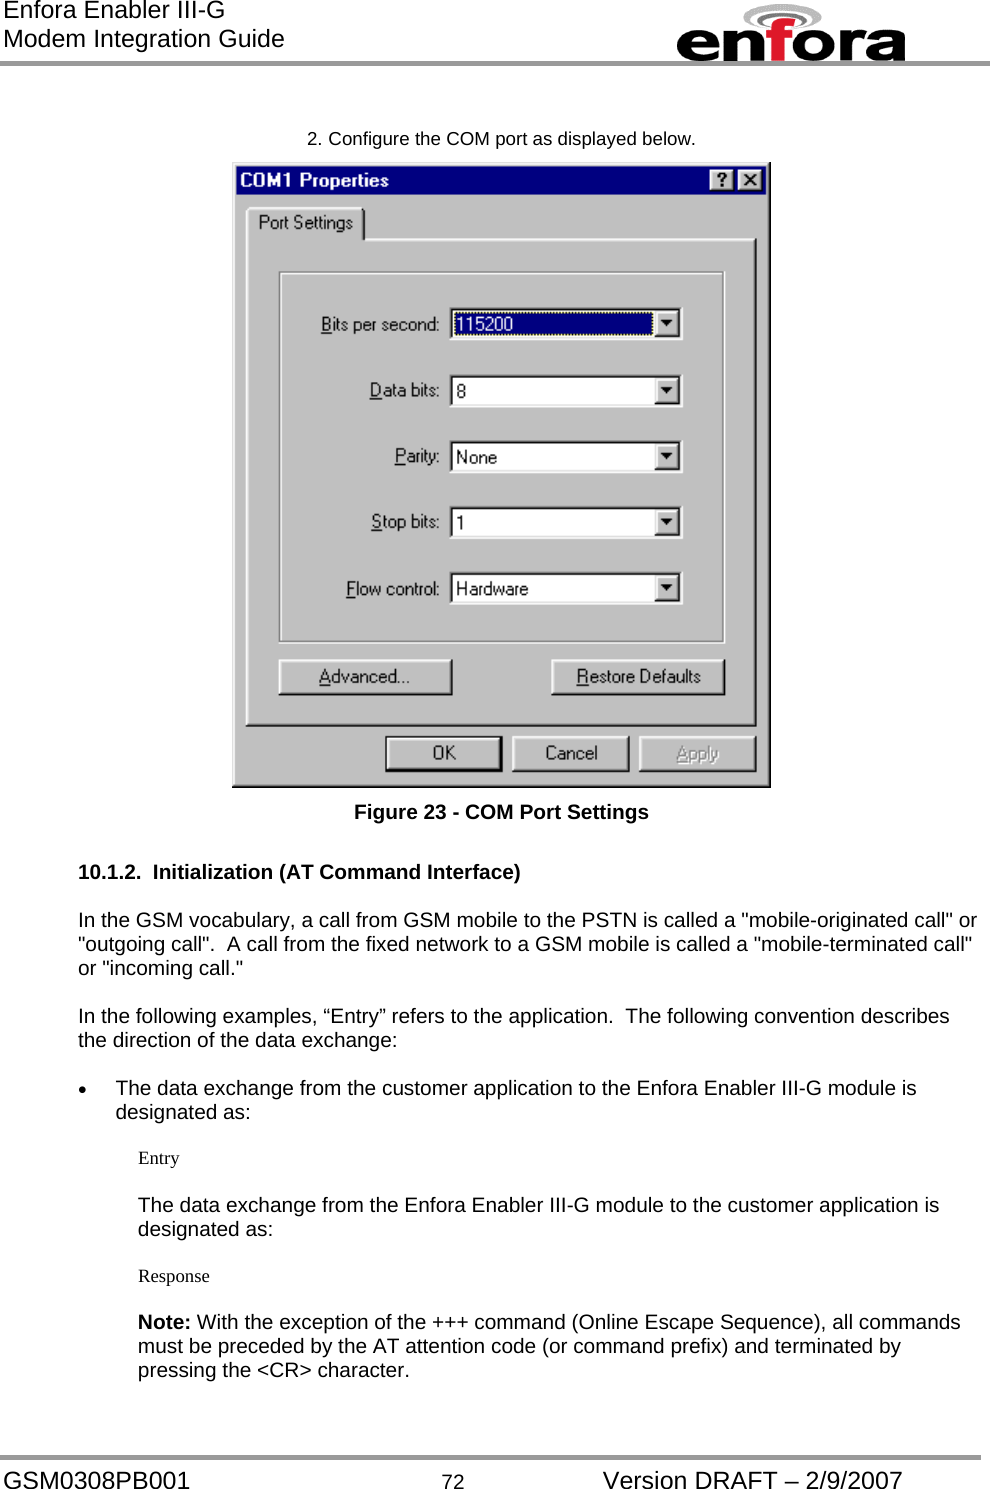 Enfora Enabler III-G Modem Integration Guide  2. Configure the COM port as displayed below.  Figure 23 - COM Port Settings  10.1.2.  Initialization (AT Command Interface)  In the GSM vocabulary, a call from GSM mobile to the PSTN is called a &quot;mobile-originated call&quot; or &quot;outgoing call&quot;.  A call from the fixed network to a GSM mobile is called a &quot;mobile-terminated call&quot; or &quot;incoming call.&quot;  In the following examples, “Entry” refers to the application.  The following convention describes the direction of the data exchange:  •  The data exchange from the customer application to the Enfora Enabler III-G module is designated as:  Entry  The data exchange from the Enfora Enabler III-G module to the customer application is designated as:  Response  Note: With the exception of the +++ command (Online Escape Sequence), all commands must be preceded by the AT attention code (or command prefix) and terminated by pressing the &lt;CR&gt; character.  GSM0308PB001  72  Version DRAFT – 2/9/2007 